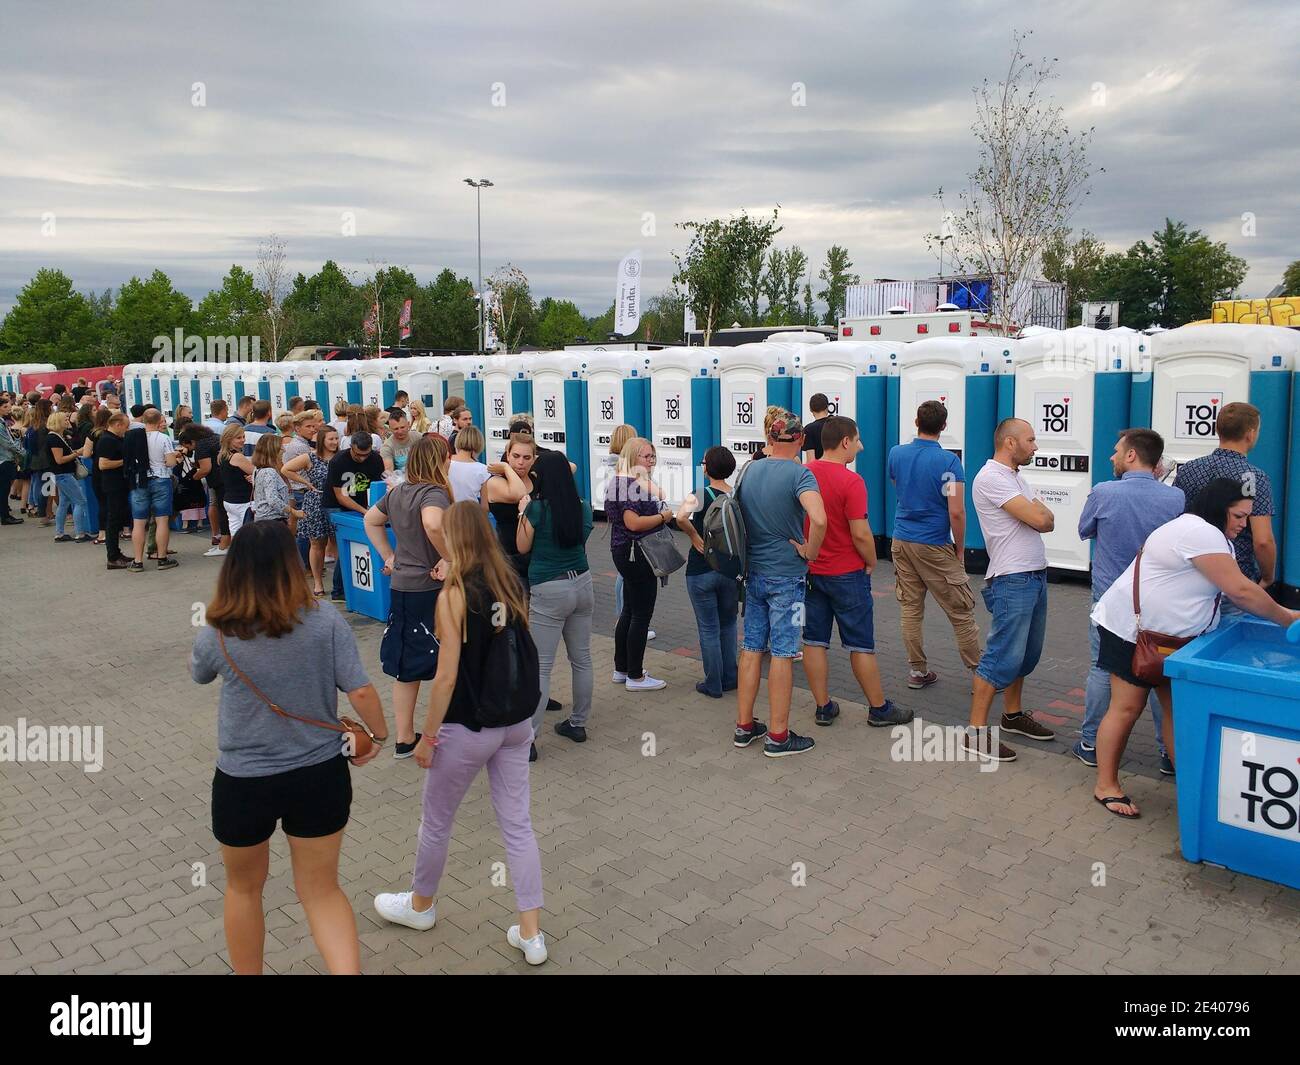 KATOWICE, POLAND - AUGUST 10, 2019: People visit massive portable restroom  array at a music event Meskie Granie in Katowice, Poland Stock Photo - Alamy